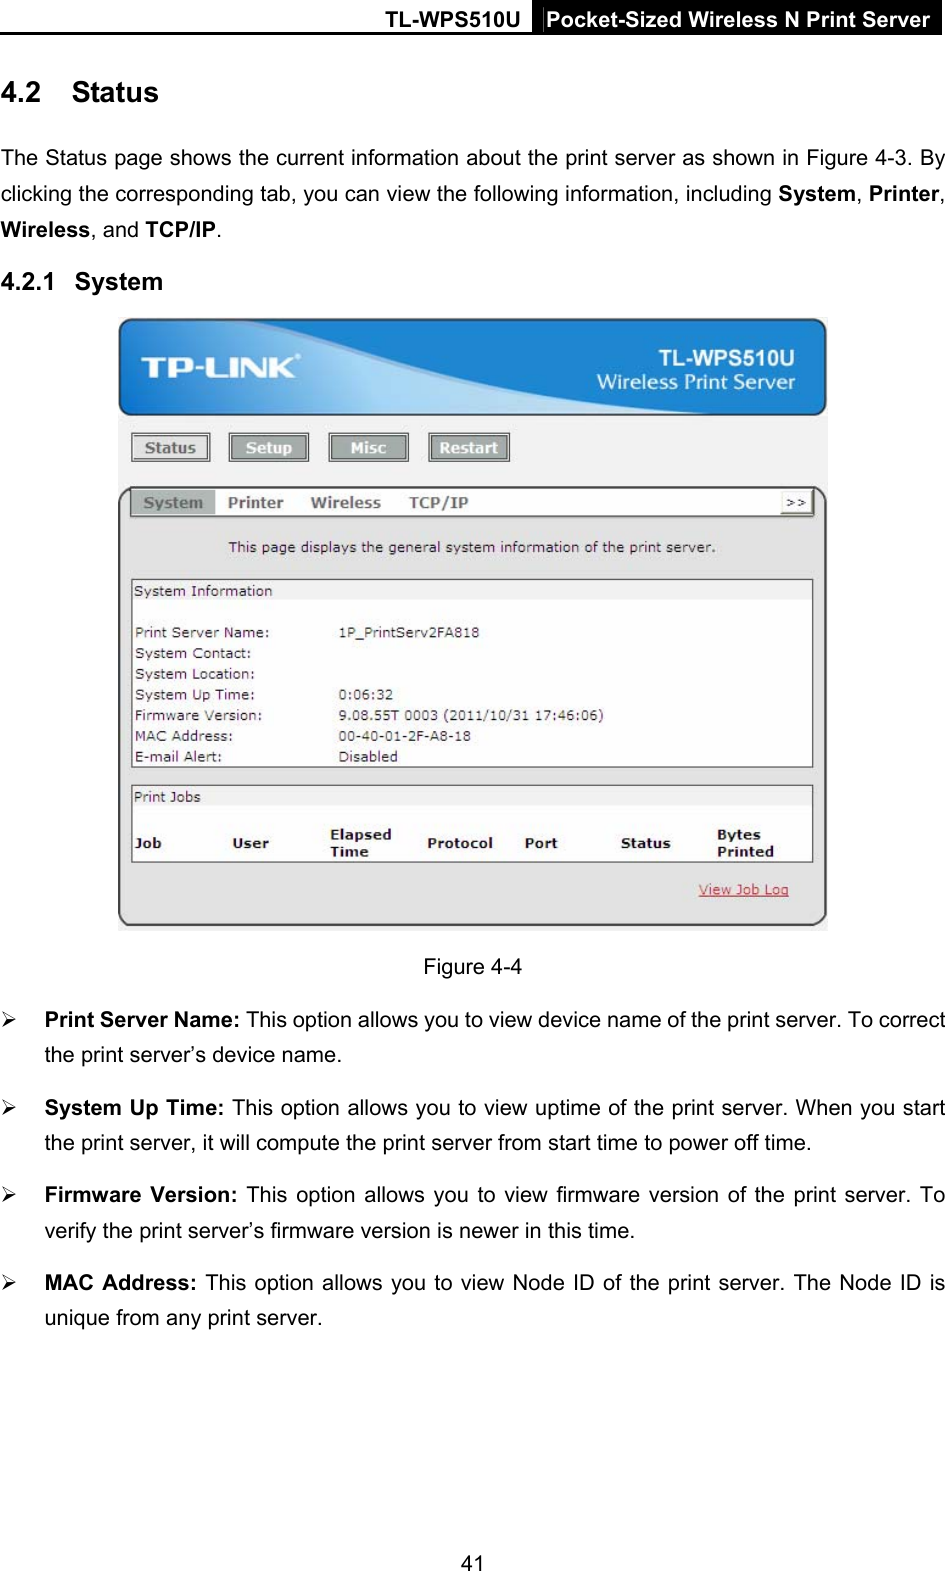 TL-WPS510U Pocket-Sized Wireless N Print Server 4.2  Status The Status page shows the current information about the print server as shown in Figure 4-3. By clicking the corresponding tab, you can view the following information, including System, Printer, Wireless, and TCP/IP.  4.2.1  System  Figure 4-4  Print Server Name: This option allows you to view device name of the print server. To correct the print server’s device name.  System Up Time: This option allows you to view uptime of the print server. When you start the print server, it will compute the print server from start time to power off time.  Firmware Version: This option allows you to view firmware version of the print server. To verify the print server’s firmware version is newer in this time.  MAC Address: This option allows you to view Node ID of the print server. The Node ID is unique from any print server. 41 